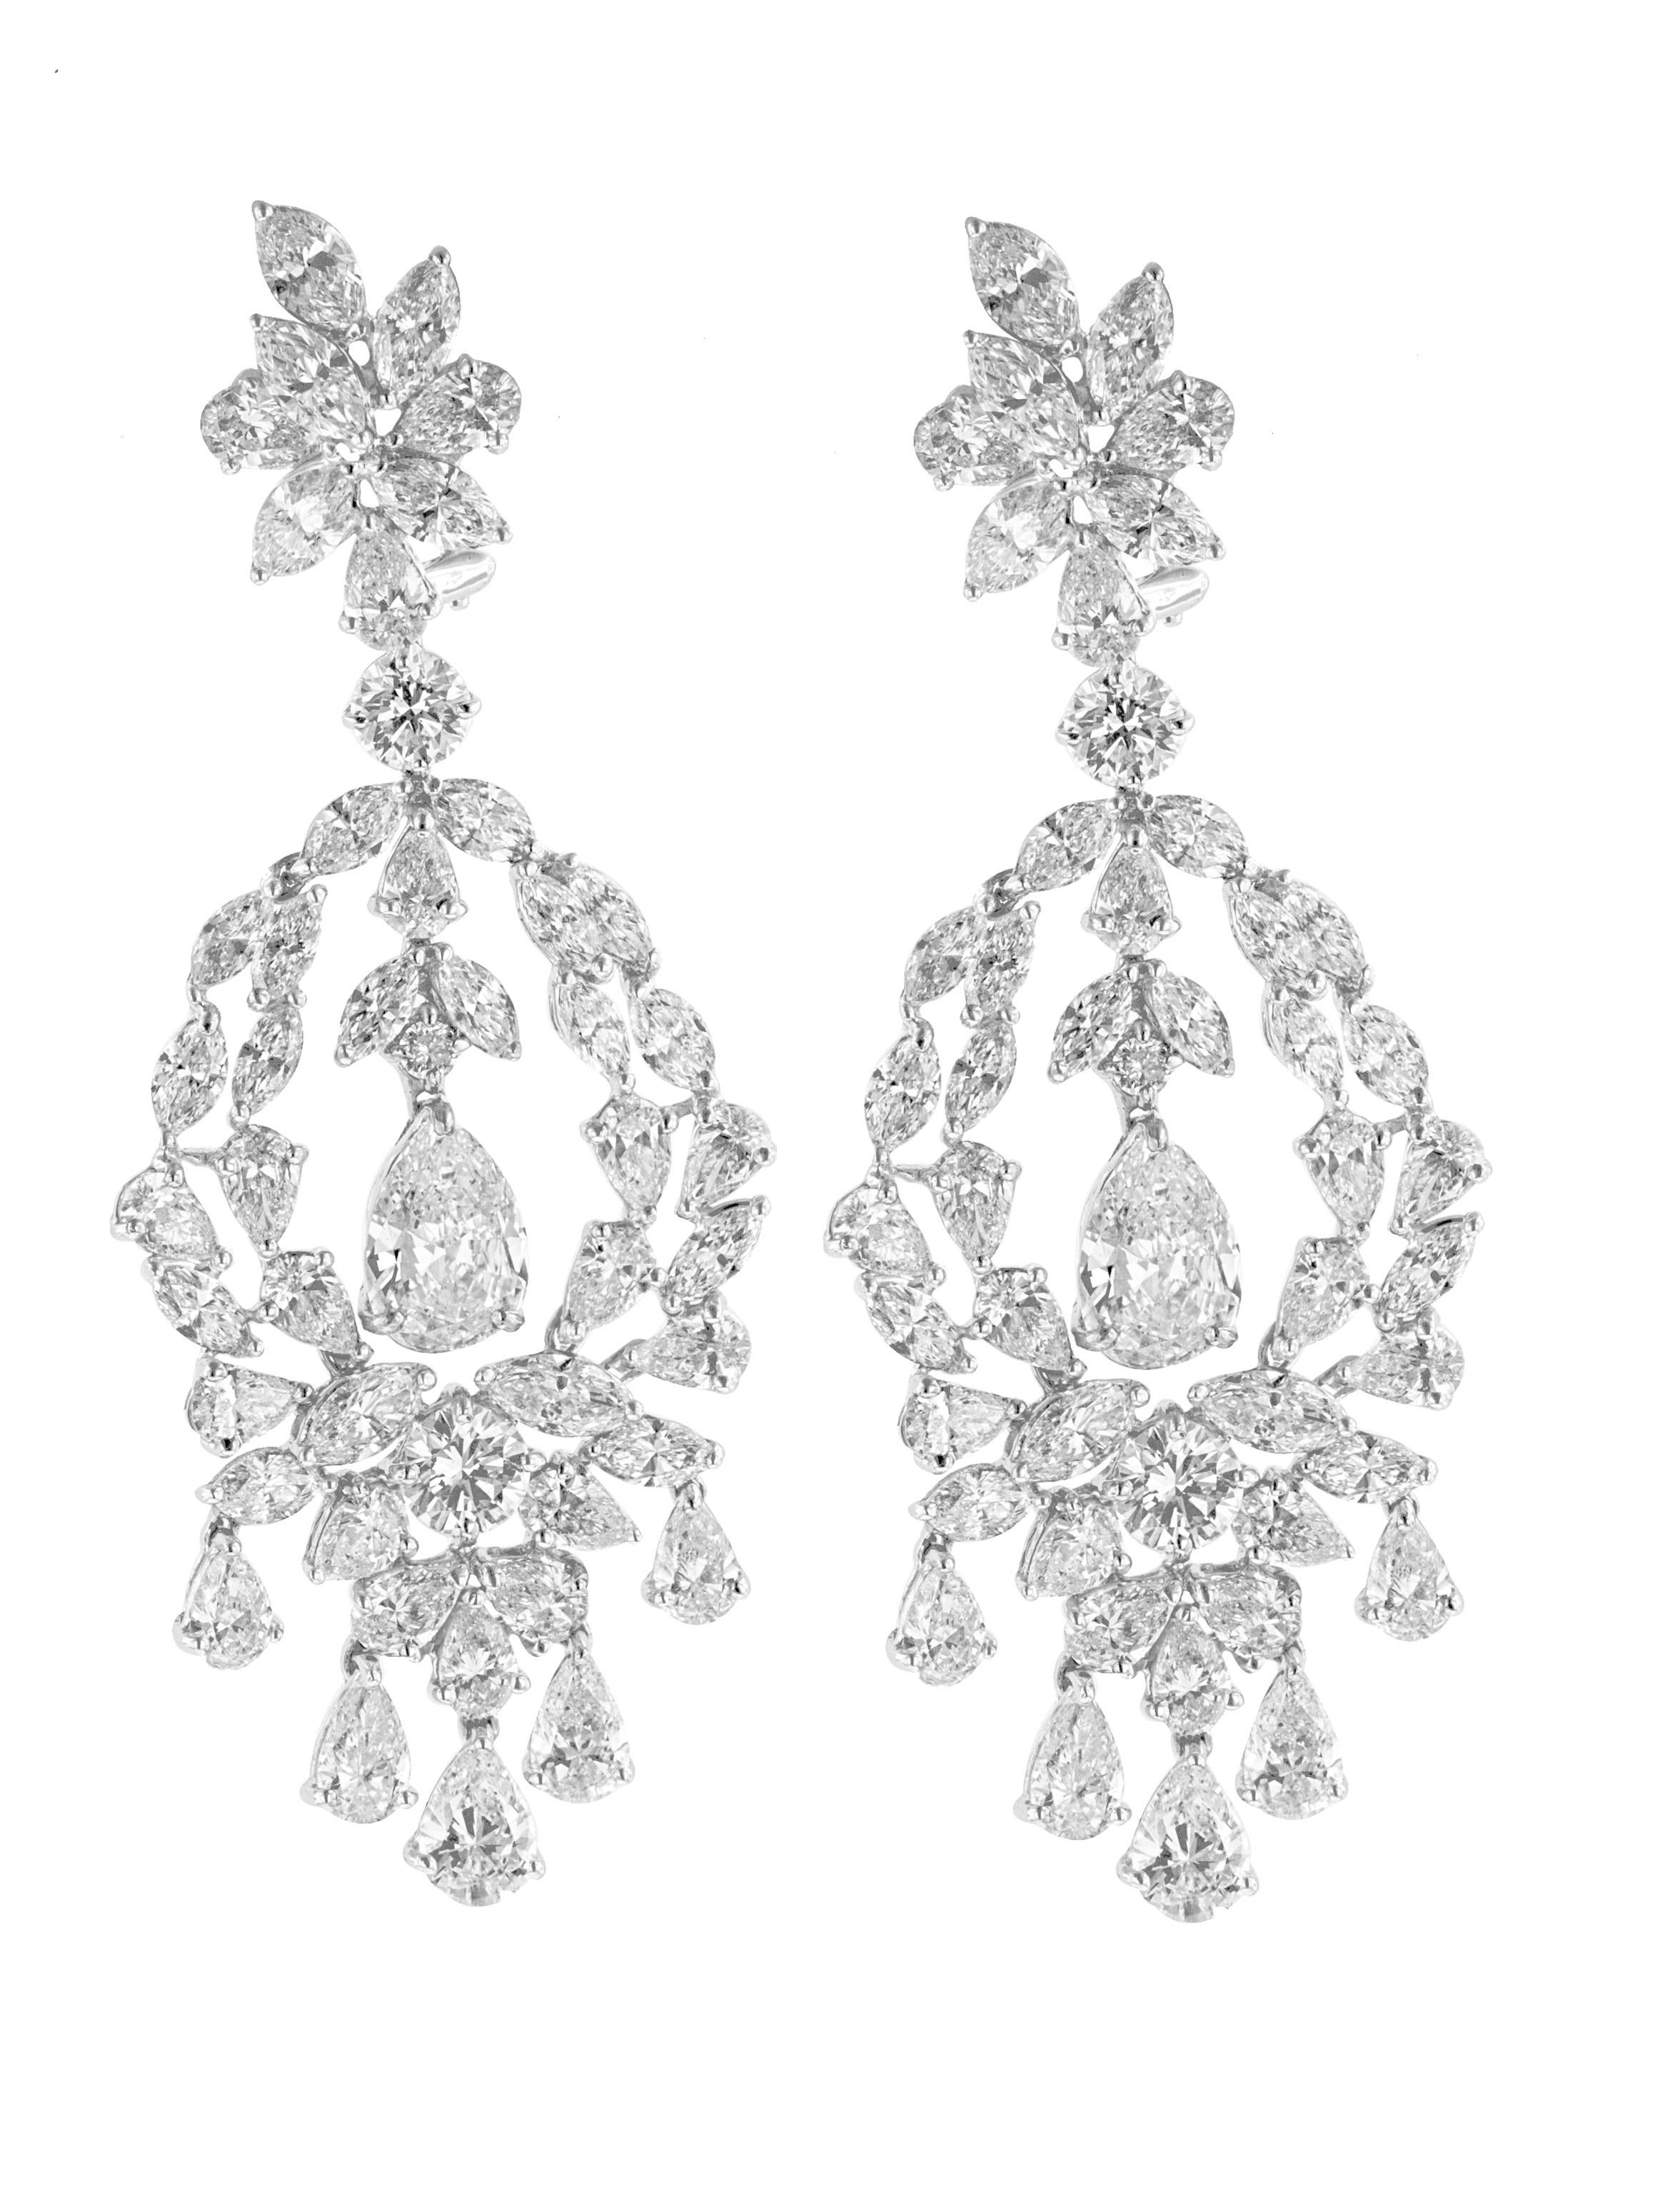 18k white gold diamond chandelier earrings features 3.78 carats (2.01 gsi2 egl(psc228 and 1.77 fsi2 egl(psc230) of pear shape certified diamonds and 26.00 carats multishape diamonds.
